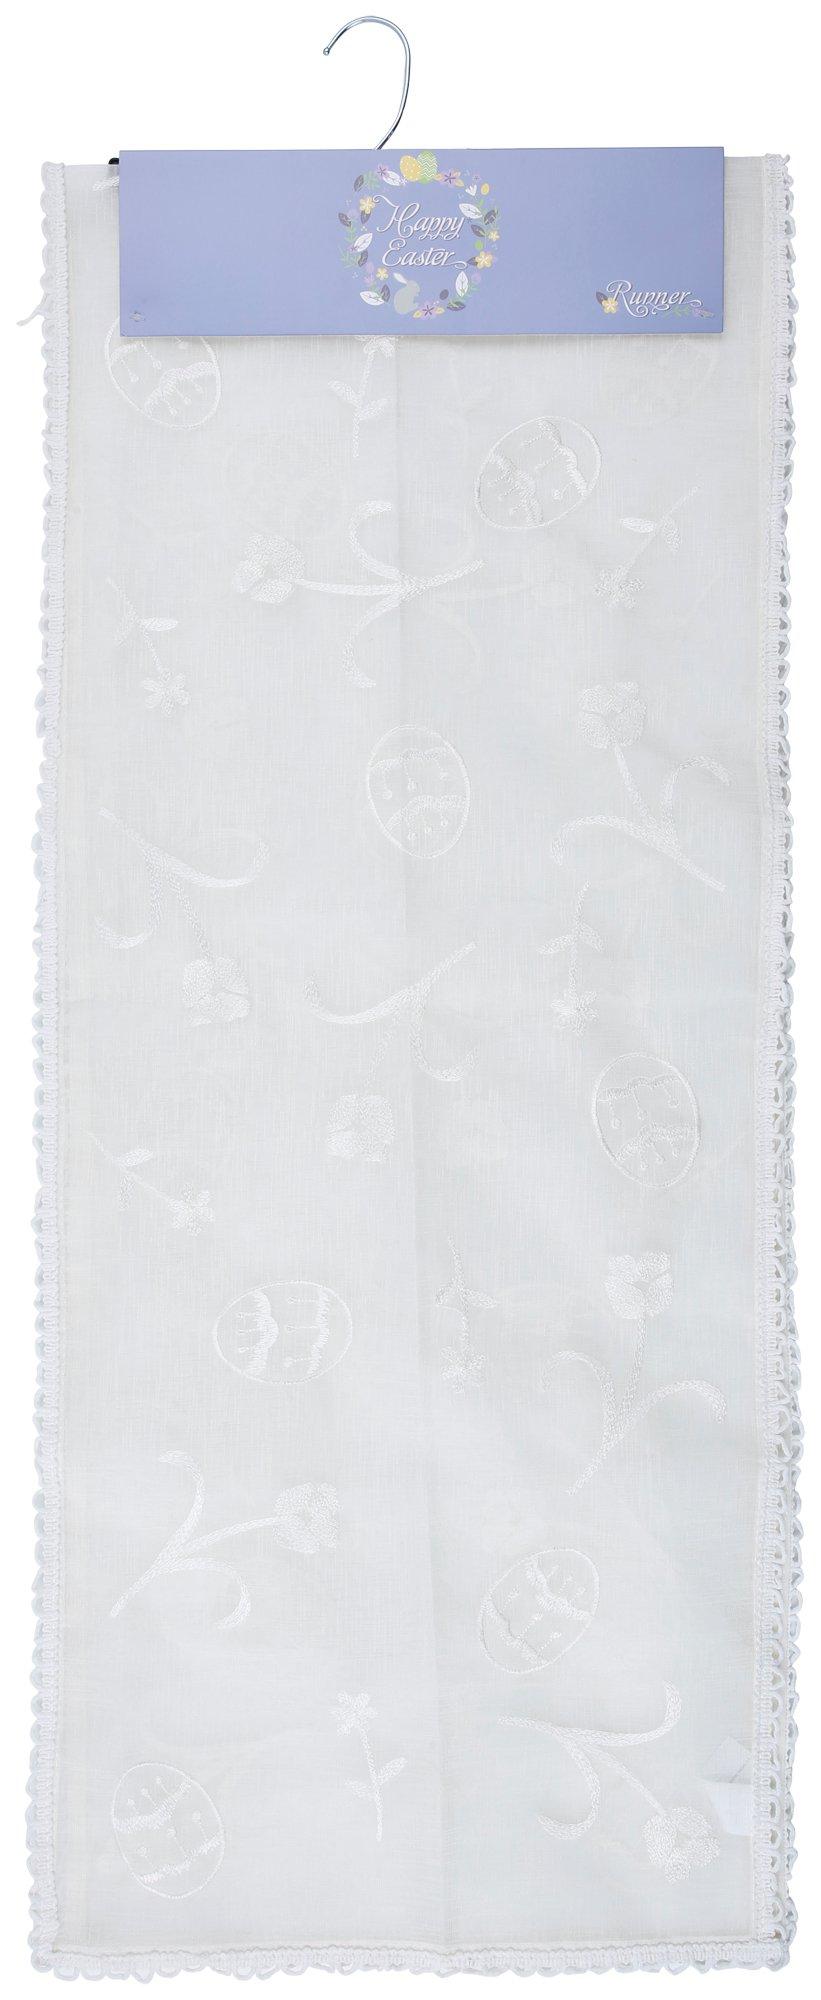 14x72 Embroidered Easter Table Runner